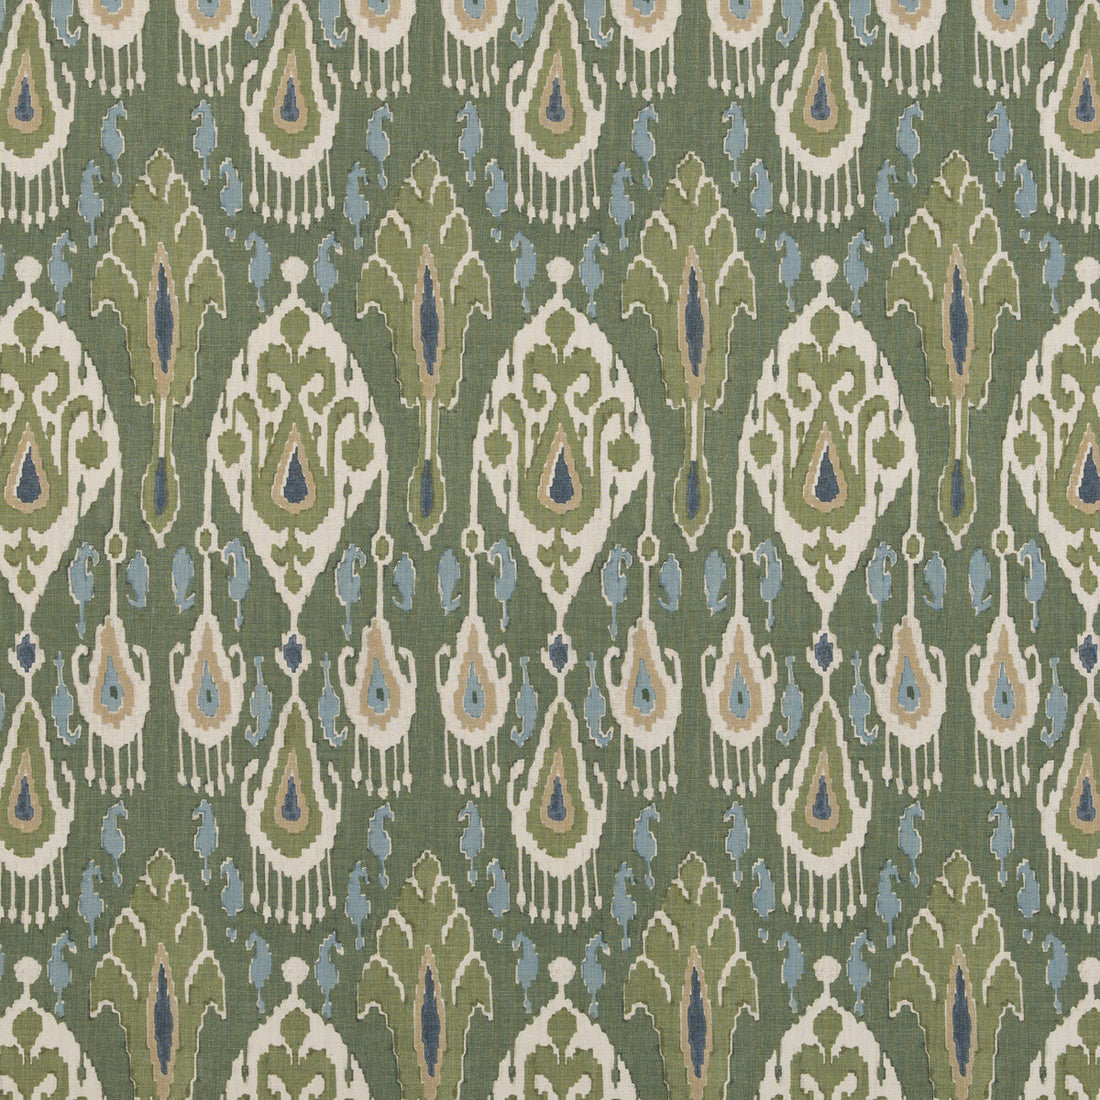 Ikat Bokhara Linen fabric in emerald color - pattern BP10939.2.0 - by G P &amp; J Baker in the Caspian collection